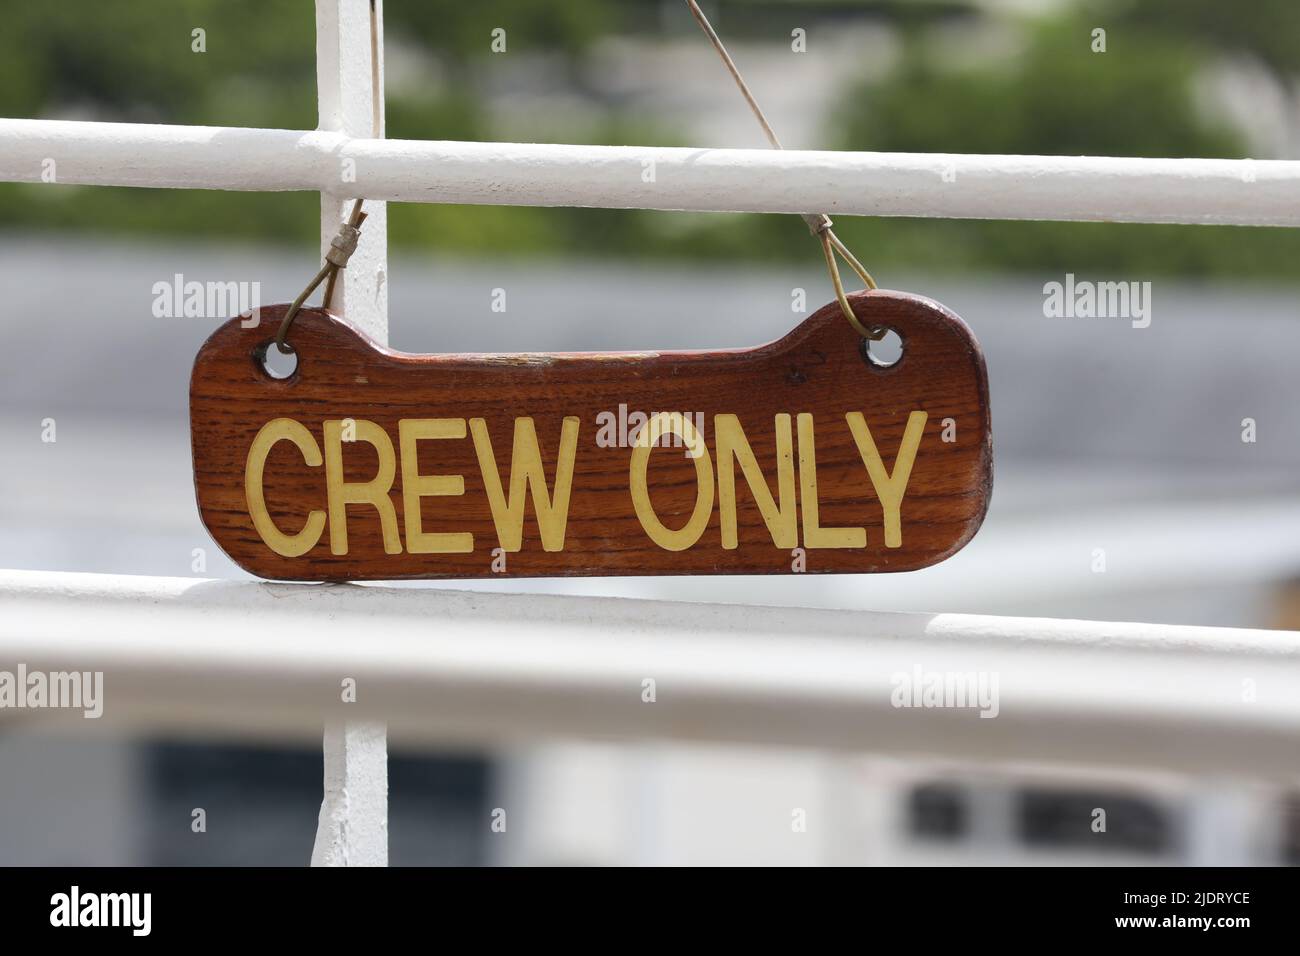 Hanged sign Crew Only on the stairs. Stock Photo